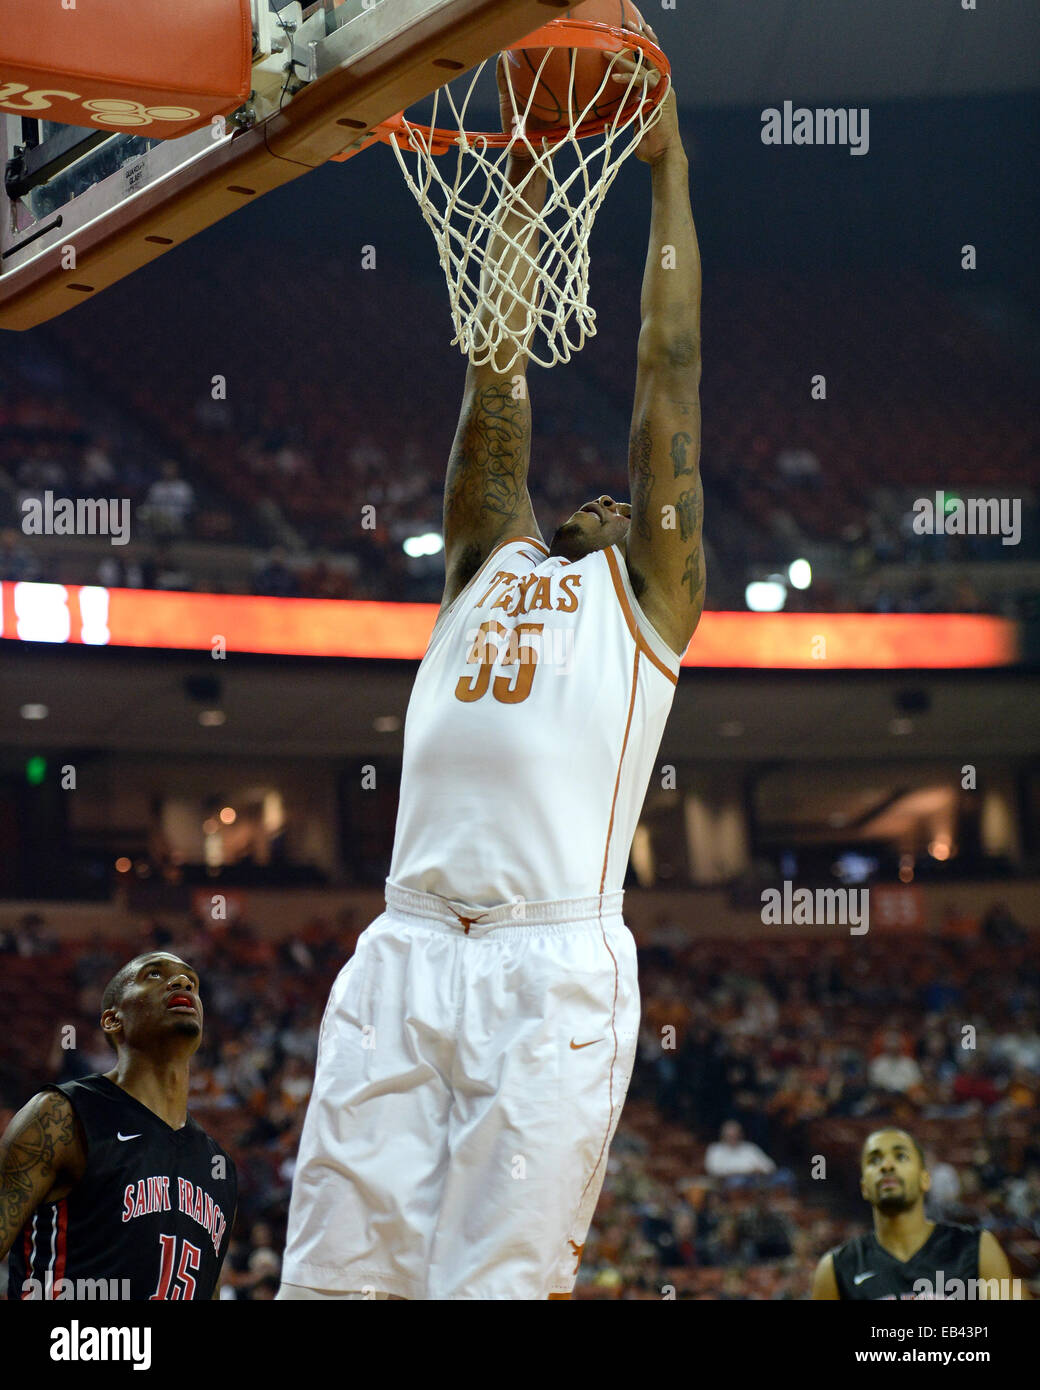 Austin, Texas. 25th Nov, 2014. Cameron Ridley #55 of the Texas Longhorns in action vs the Saint Francis Red Flash at the Frank Erwin Center in Austin Texas. Texas leads Saint Francis 36-23 at the half. Credit:  csm/Alamy Live News Stock Photo